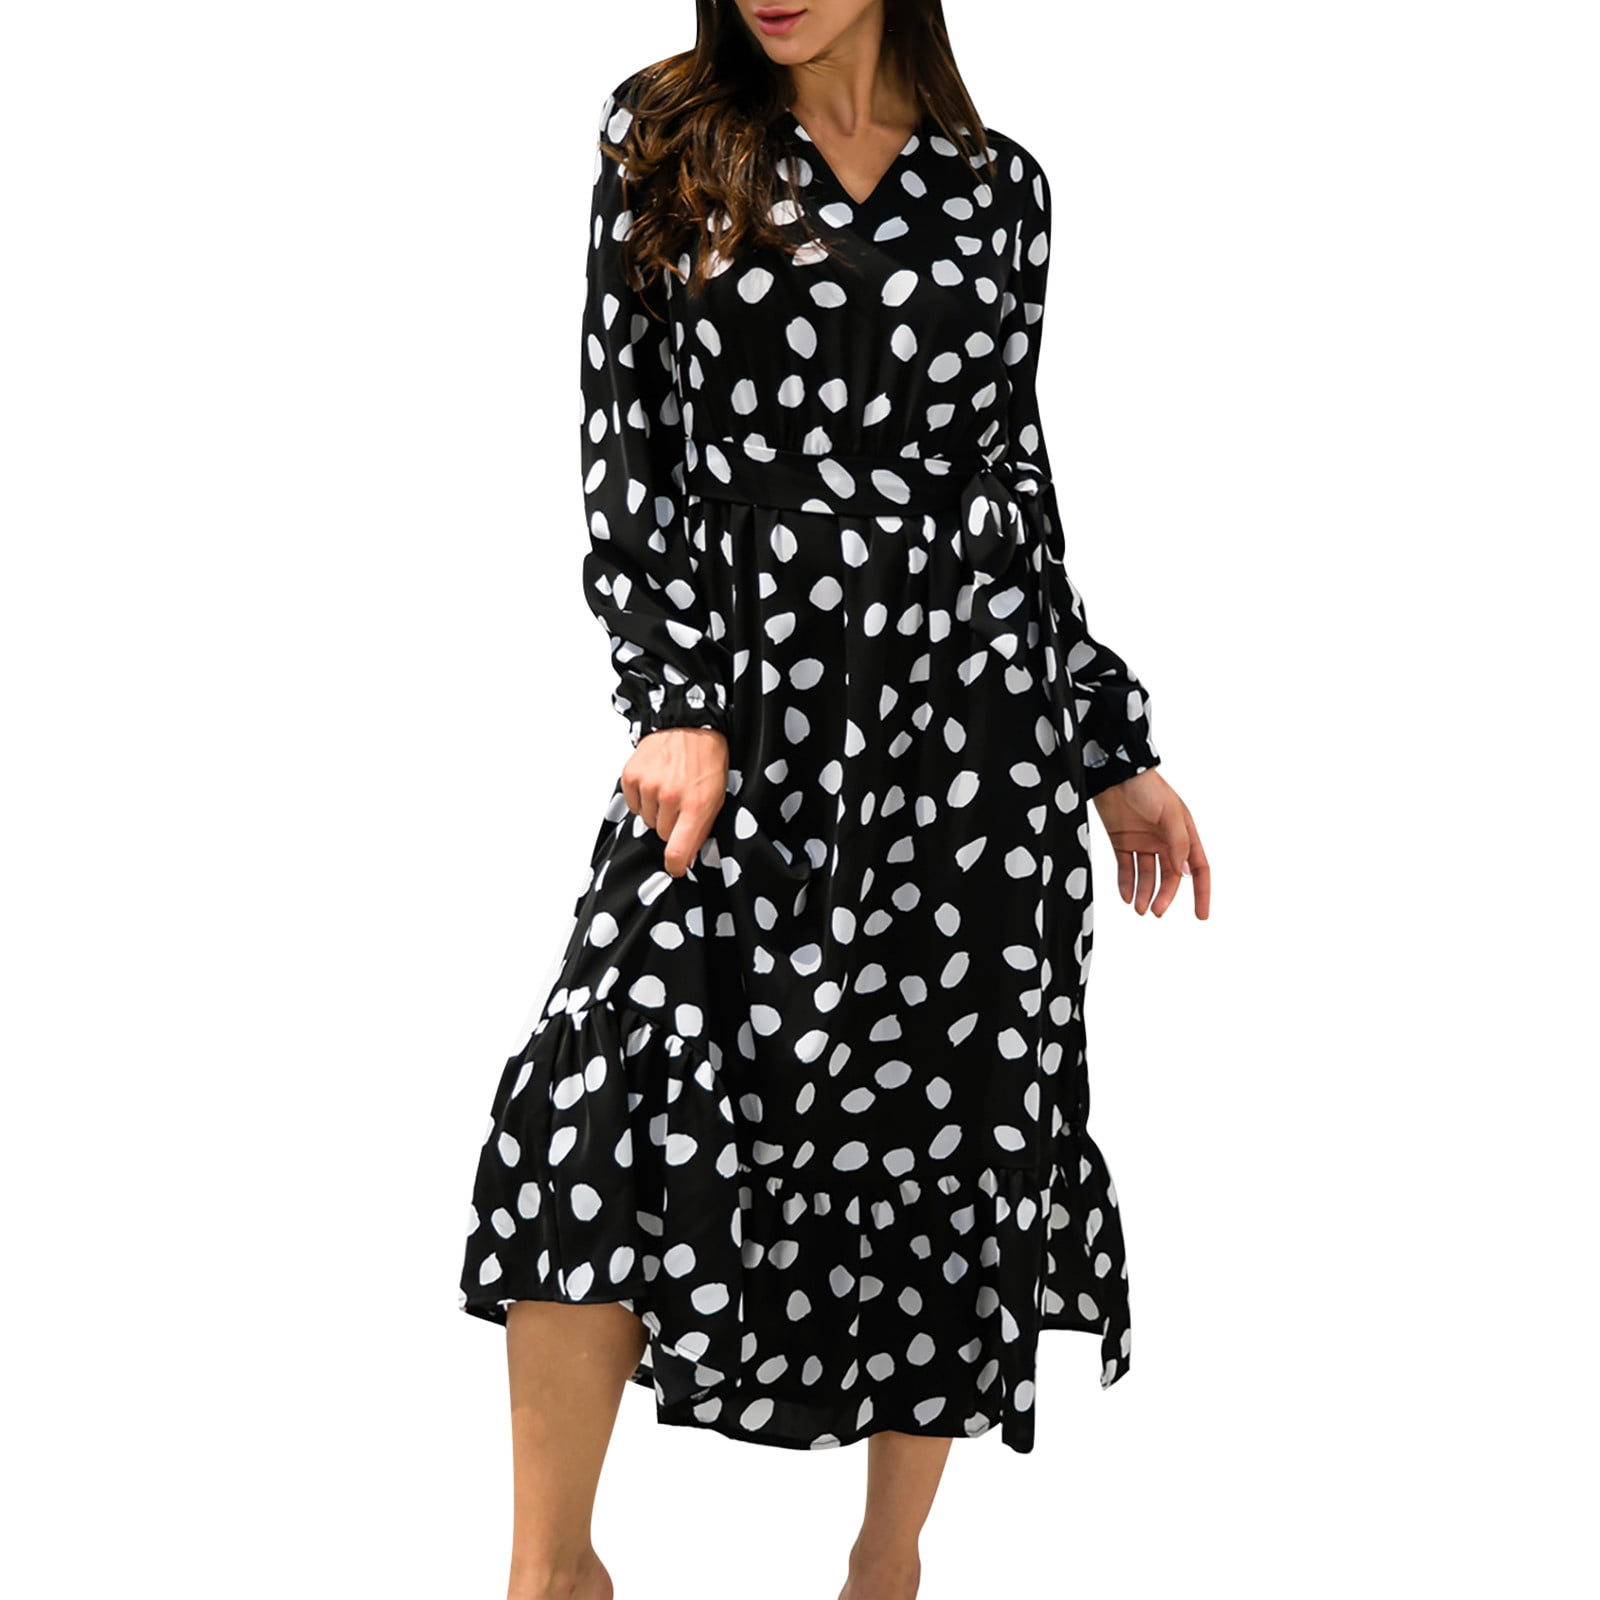 Style: Polka Dot Smock - Fashion For Lunch.